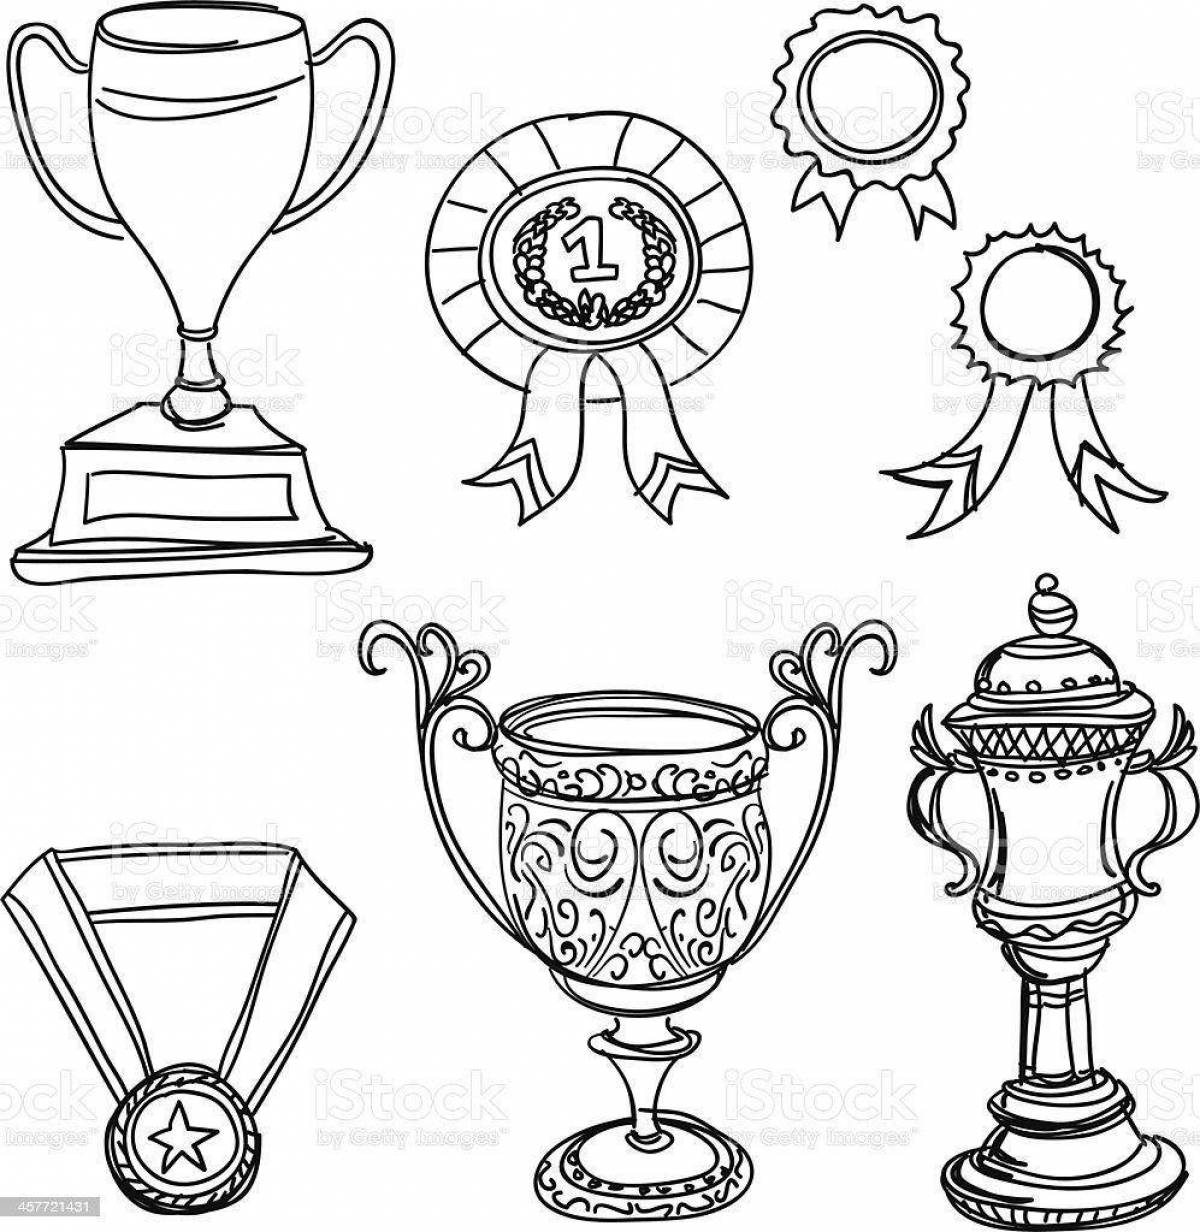 Coloring book outstanding football cup